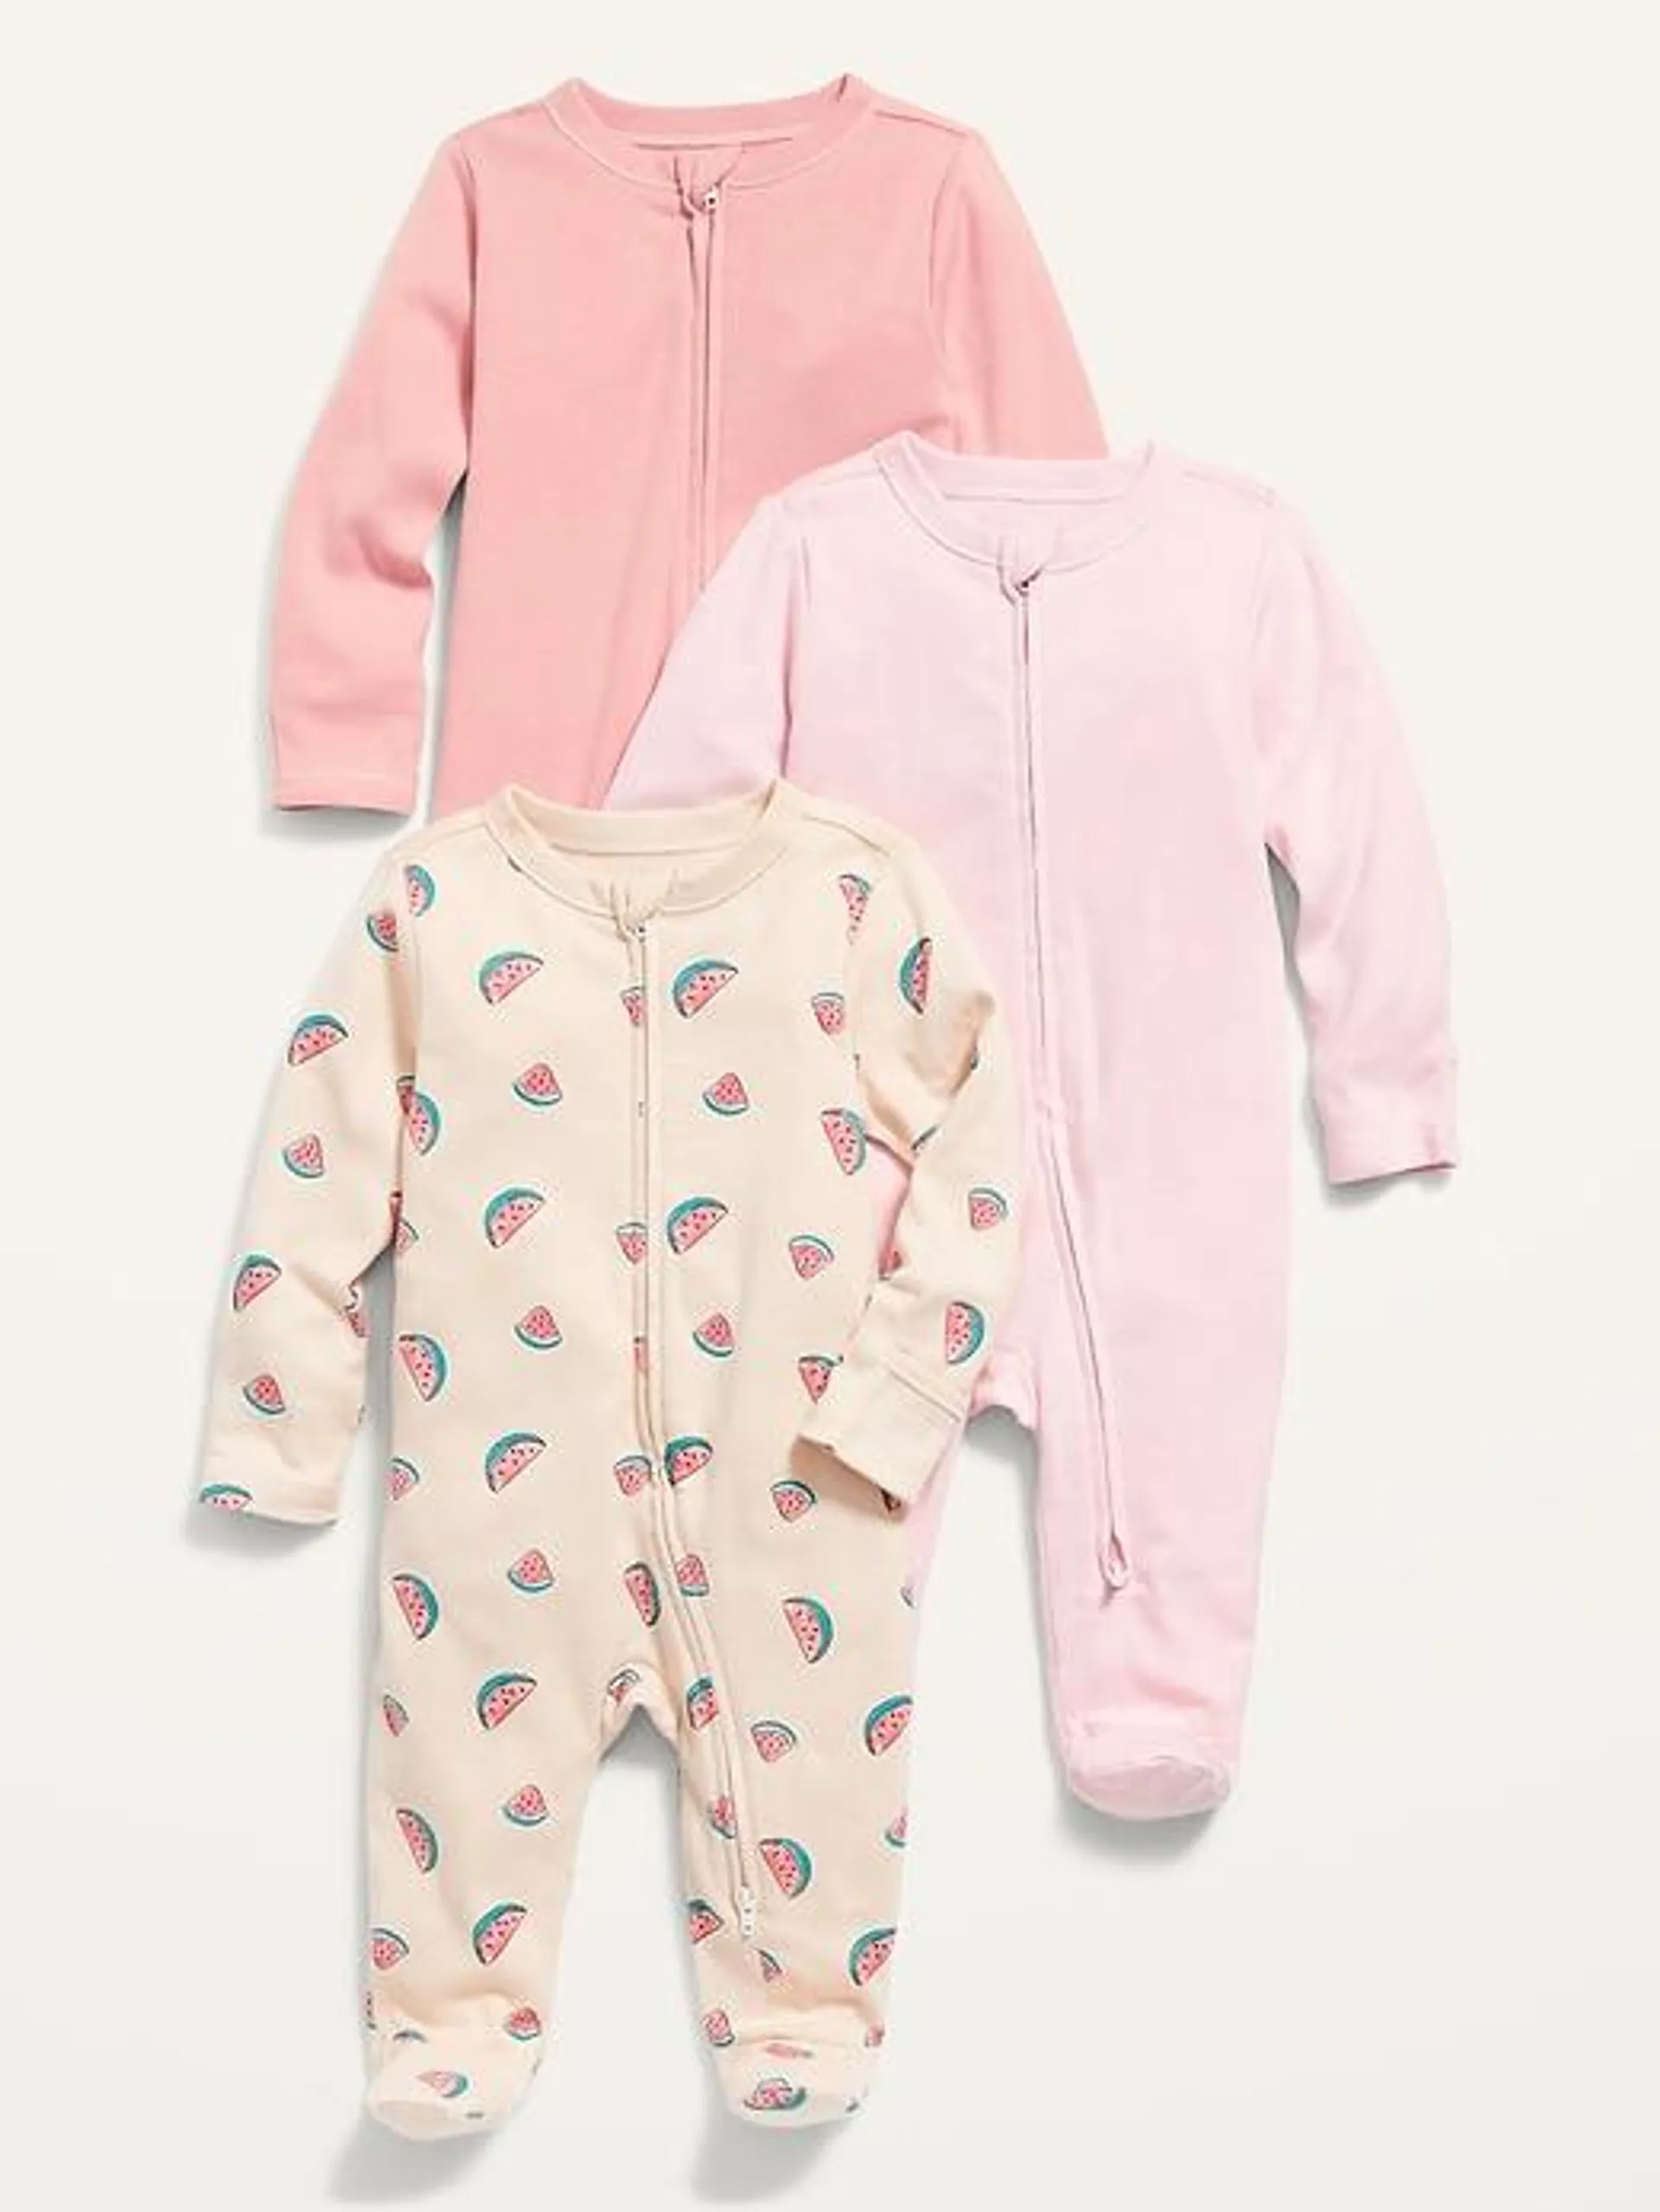 Unisex Sleep & Play 2-Way-Zip Footed One-Piece 3-Pack for Baby